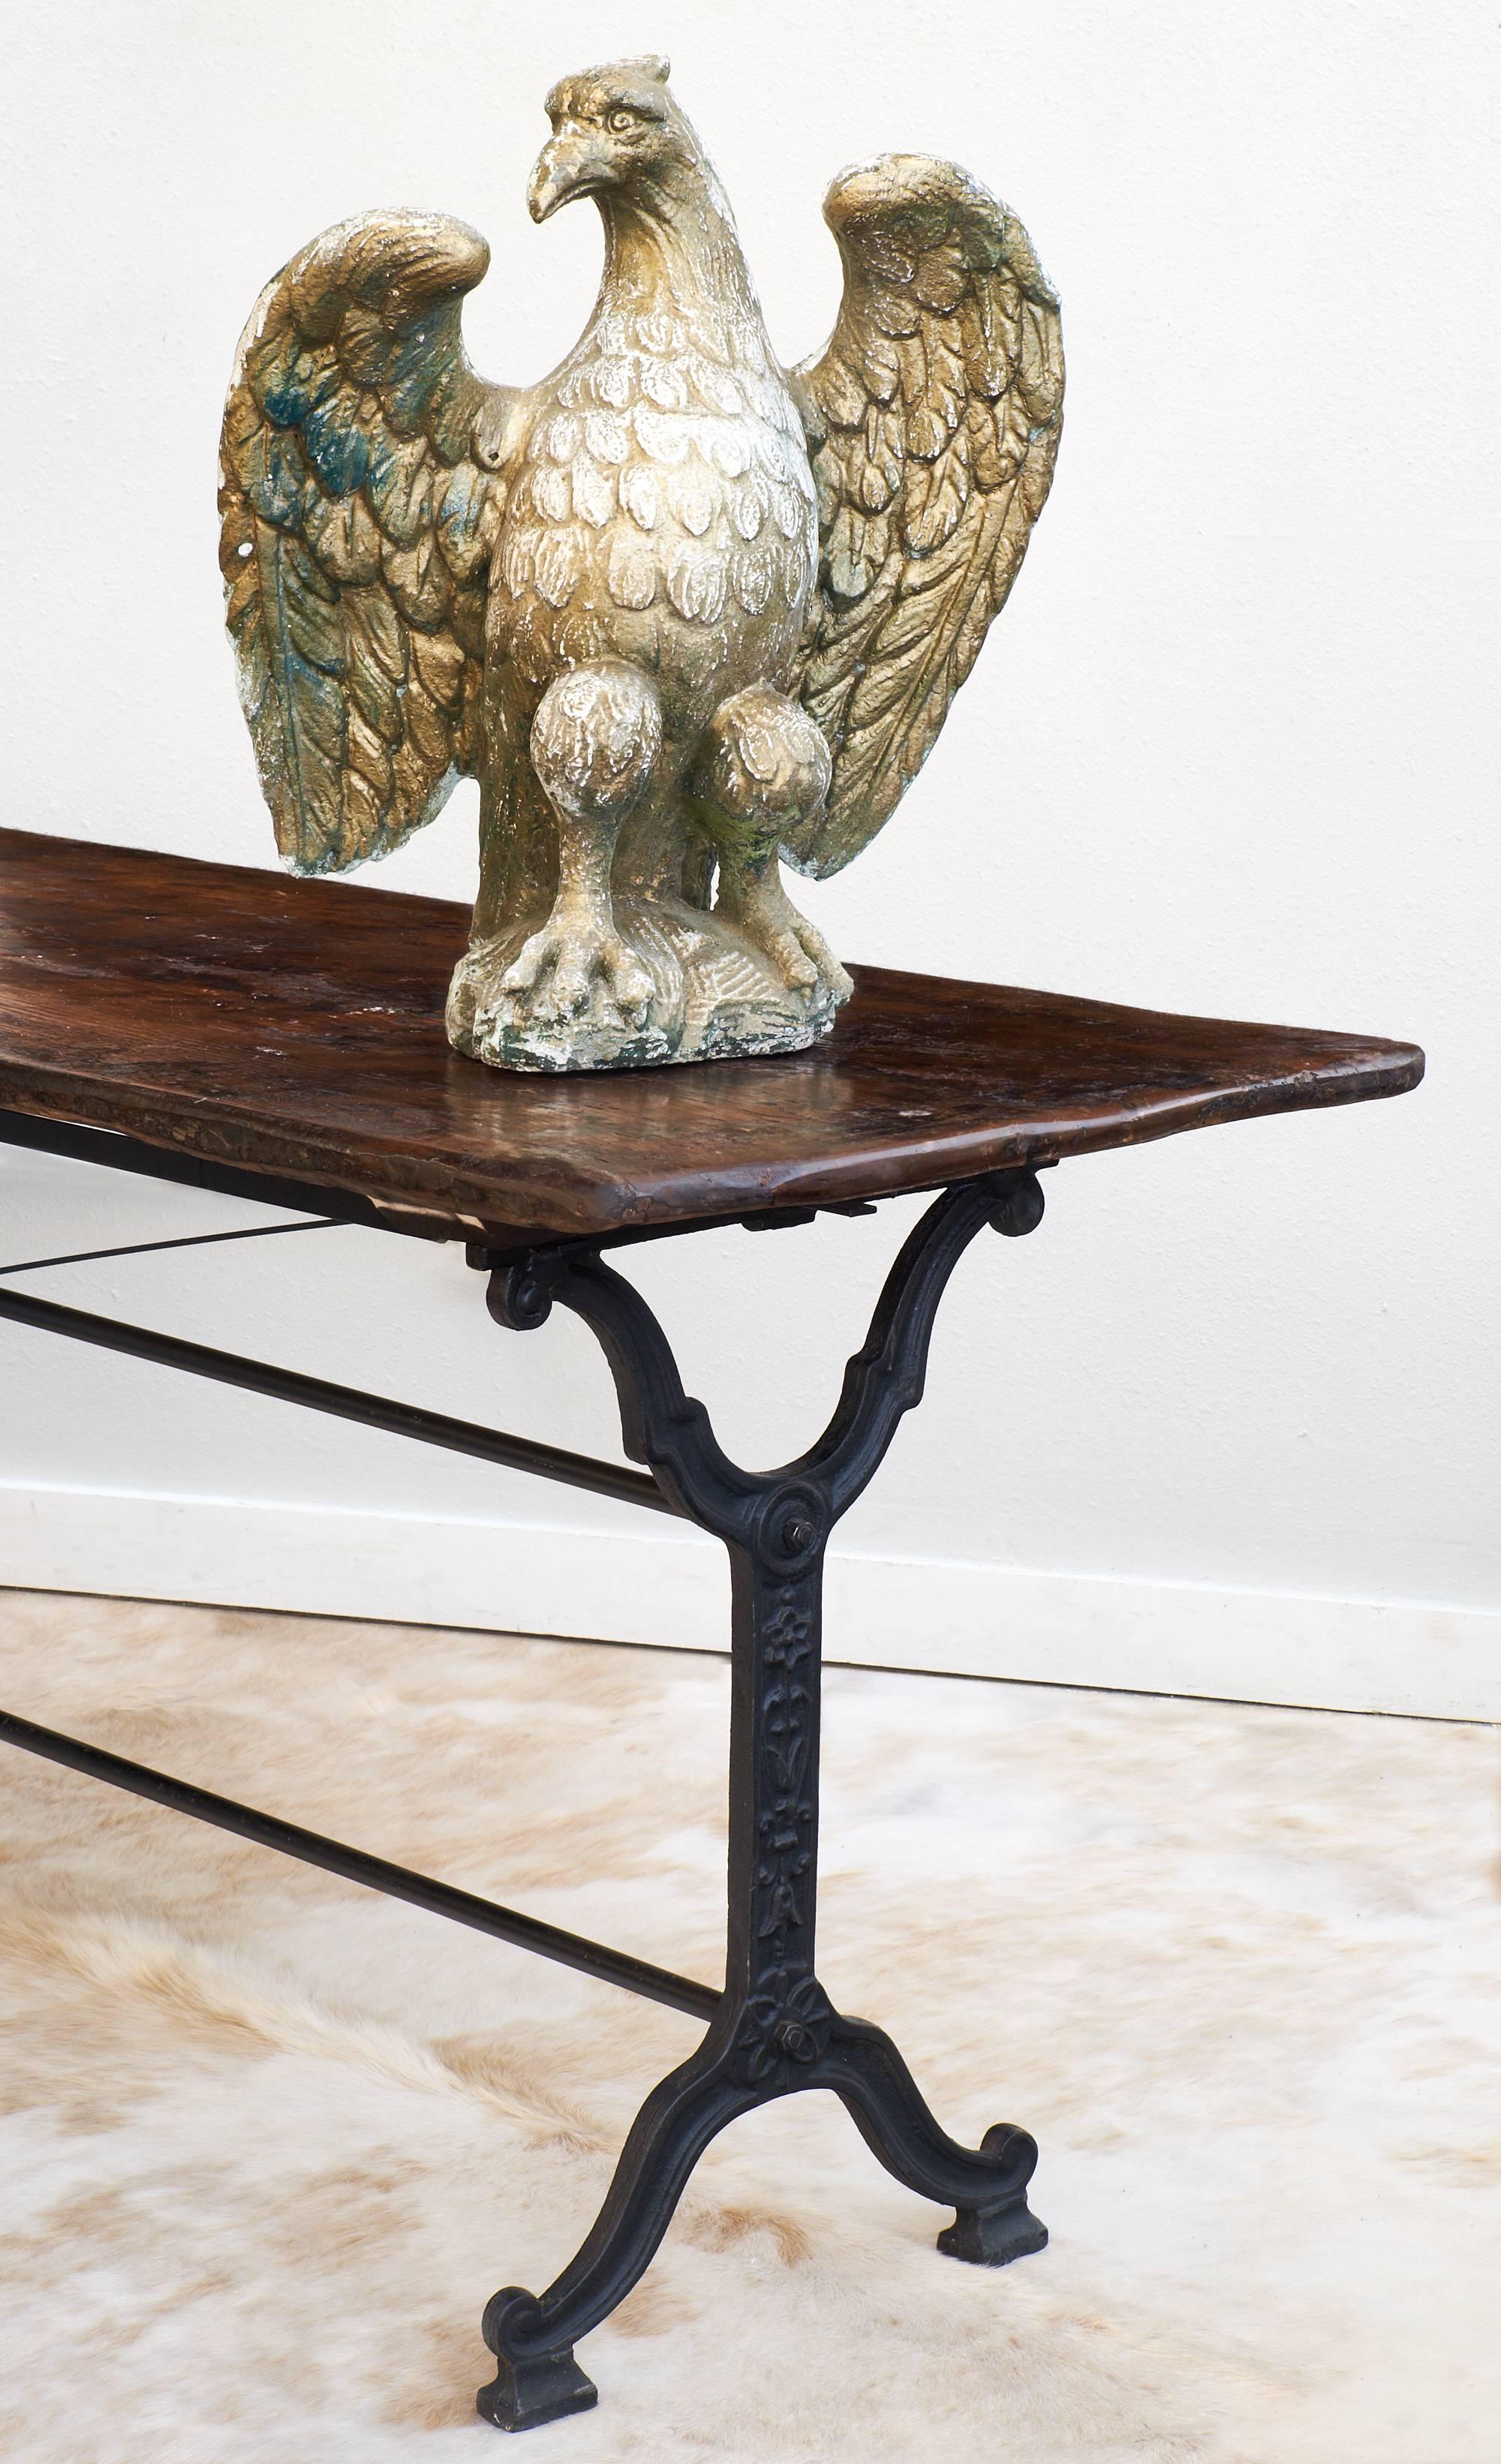 These Empire style eagle sculptures are made of reconstituted stone. The statues have a beautiful patina, and could be used outdoors or in your sun room, circa 1920.